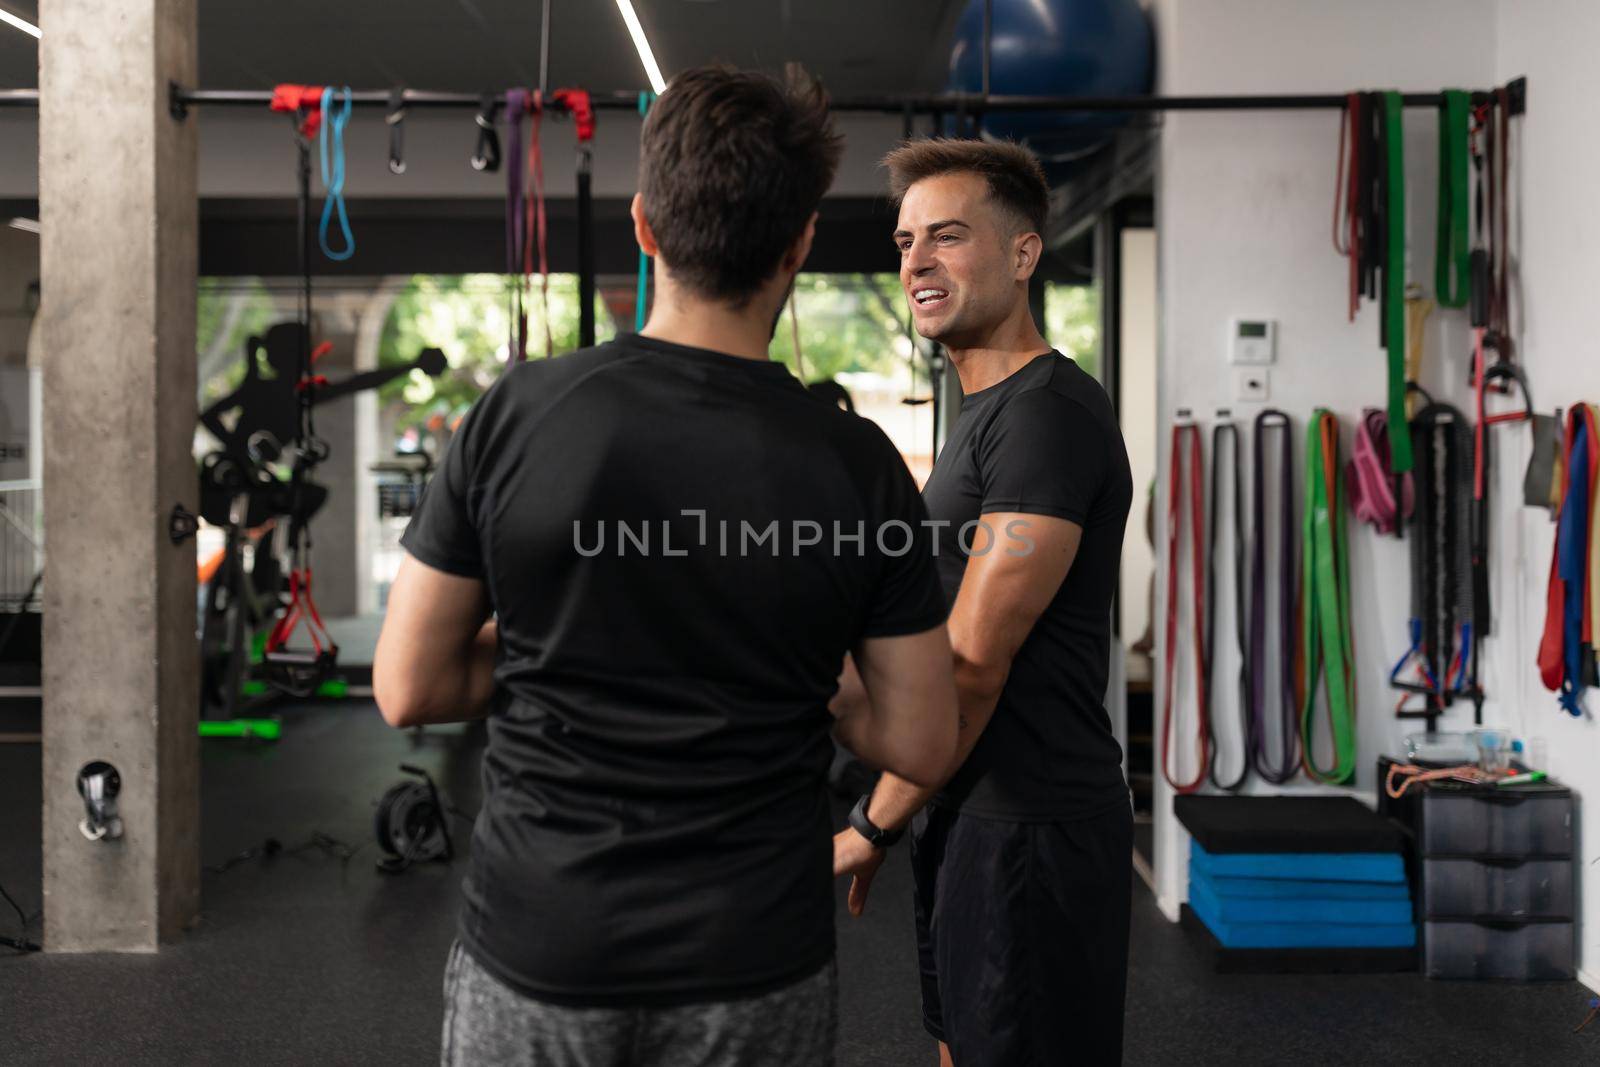 Two personal trainers talking to each other at the gym by stockrojoverdeyazul